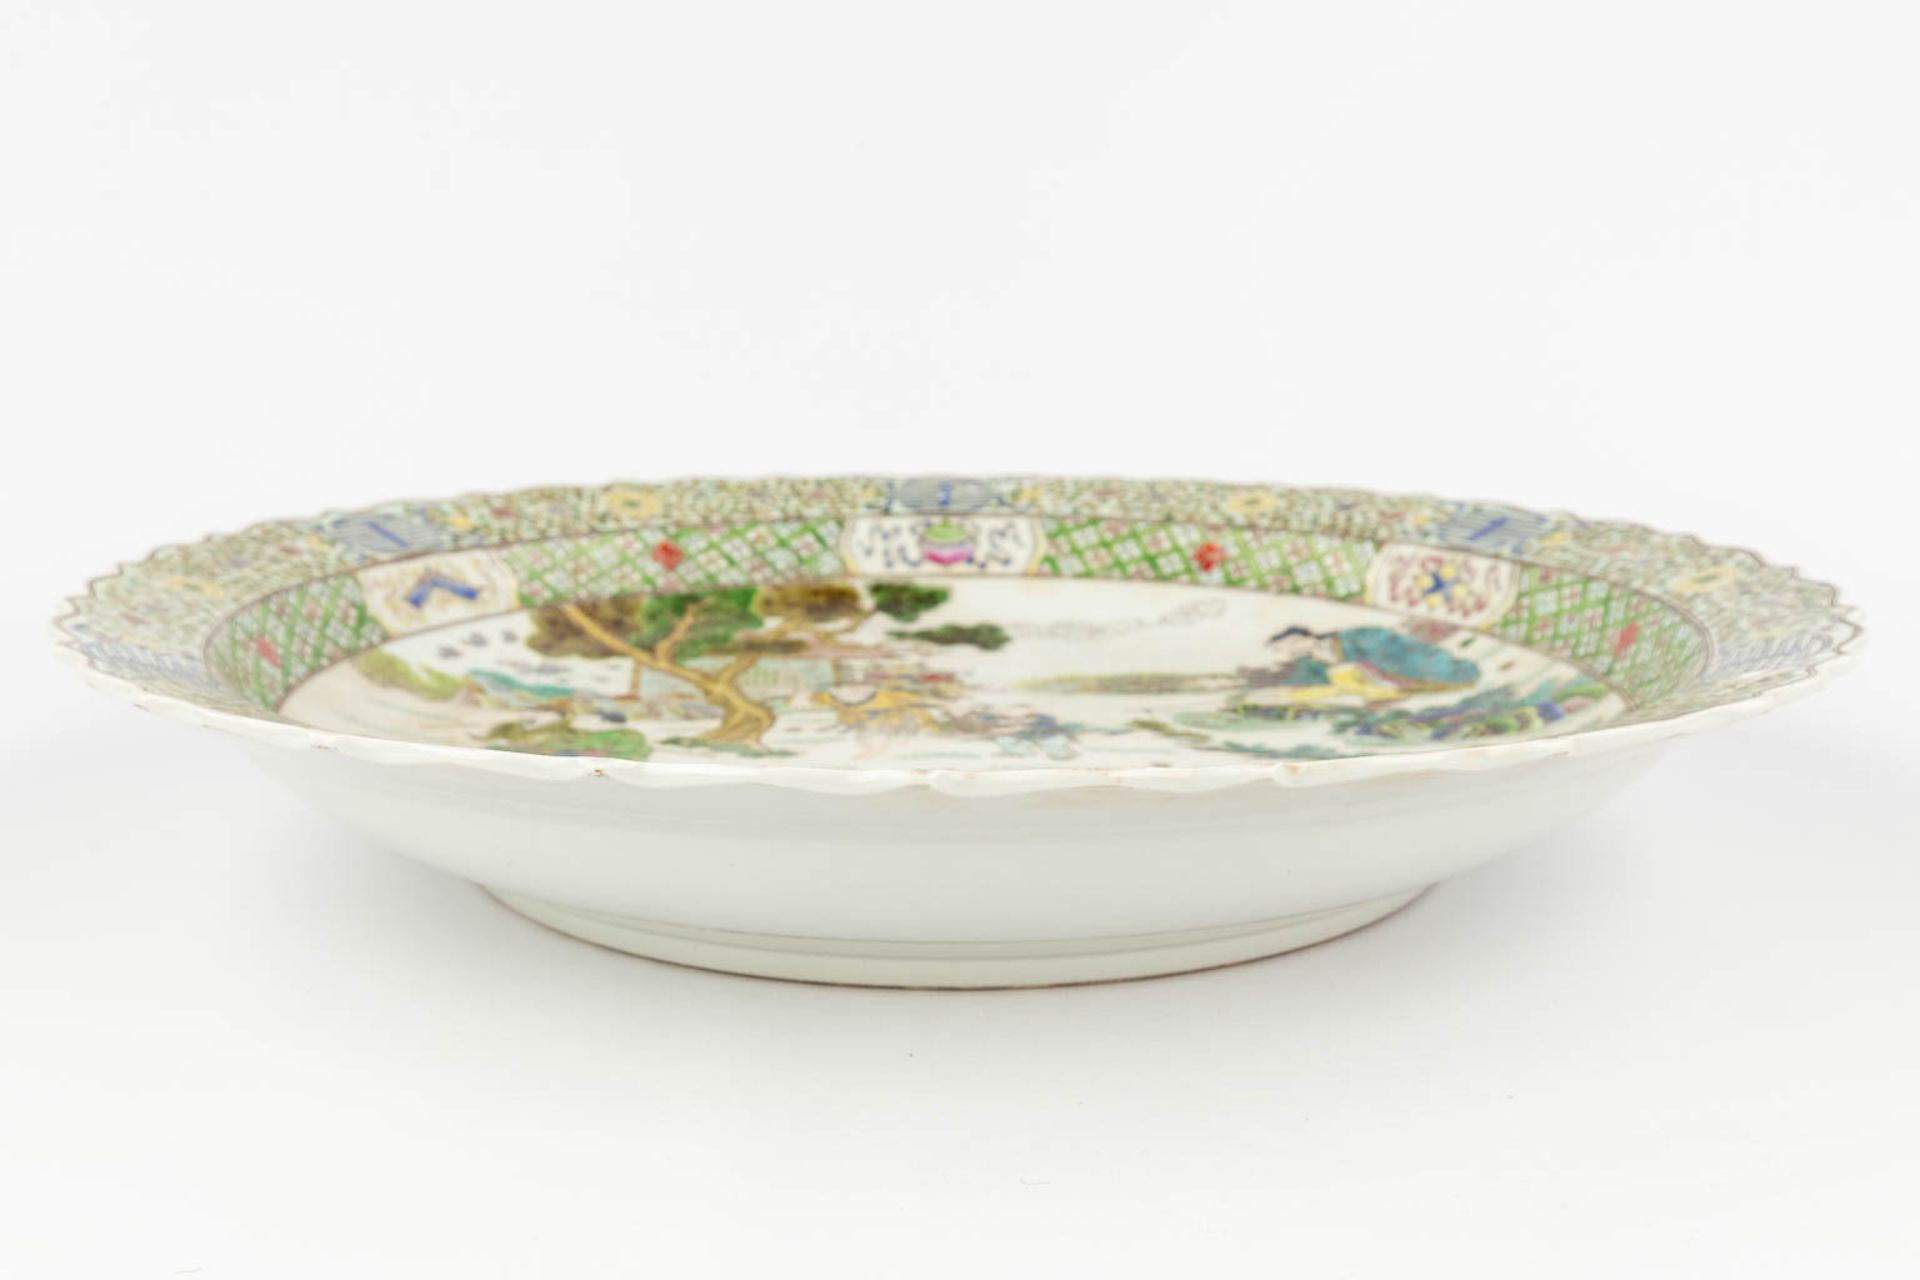 A Chinese plate 'Famille Verte' decorated with Chinese figurines. 20th C. Kangxi mark. (D: 45 cm) - Image 10 of 10